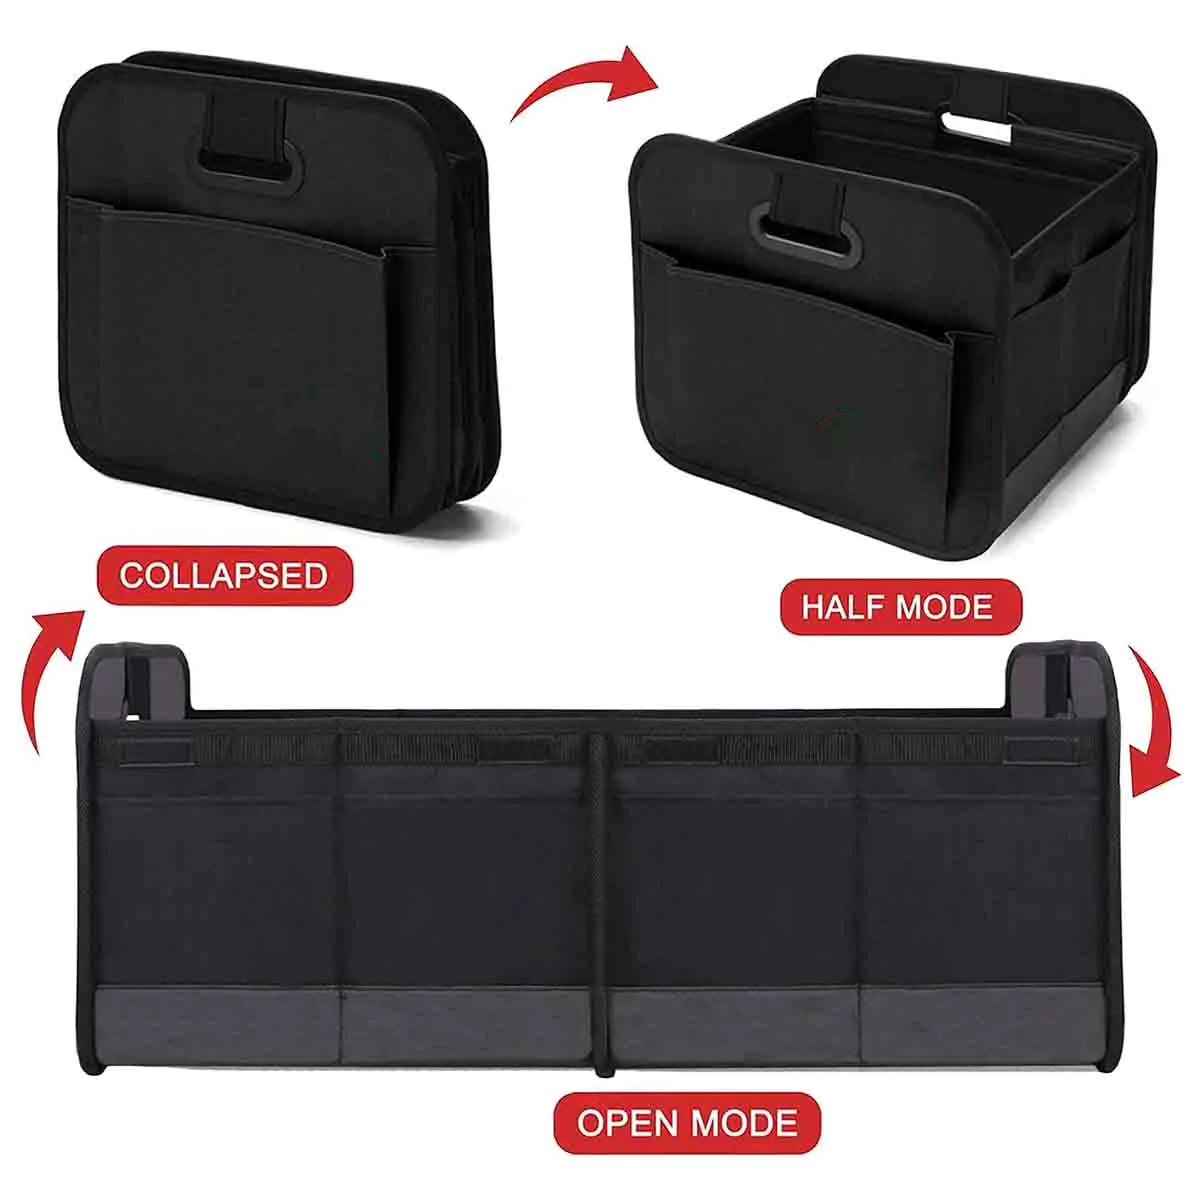 Custom Text For Car Trunk Organizer Storage, Compatible with All Cars, Reinforced Handles, Collapsible Multi, Compartment Car Organizers, Foldable and Waterproof, 600D Oxford Polyester WQ12995